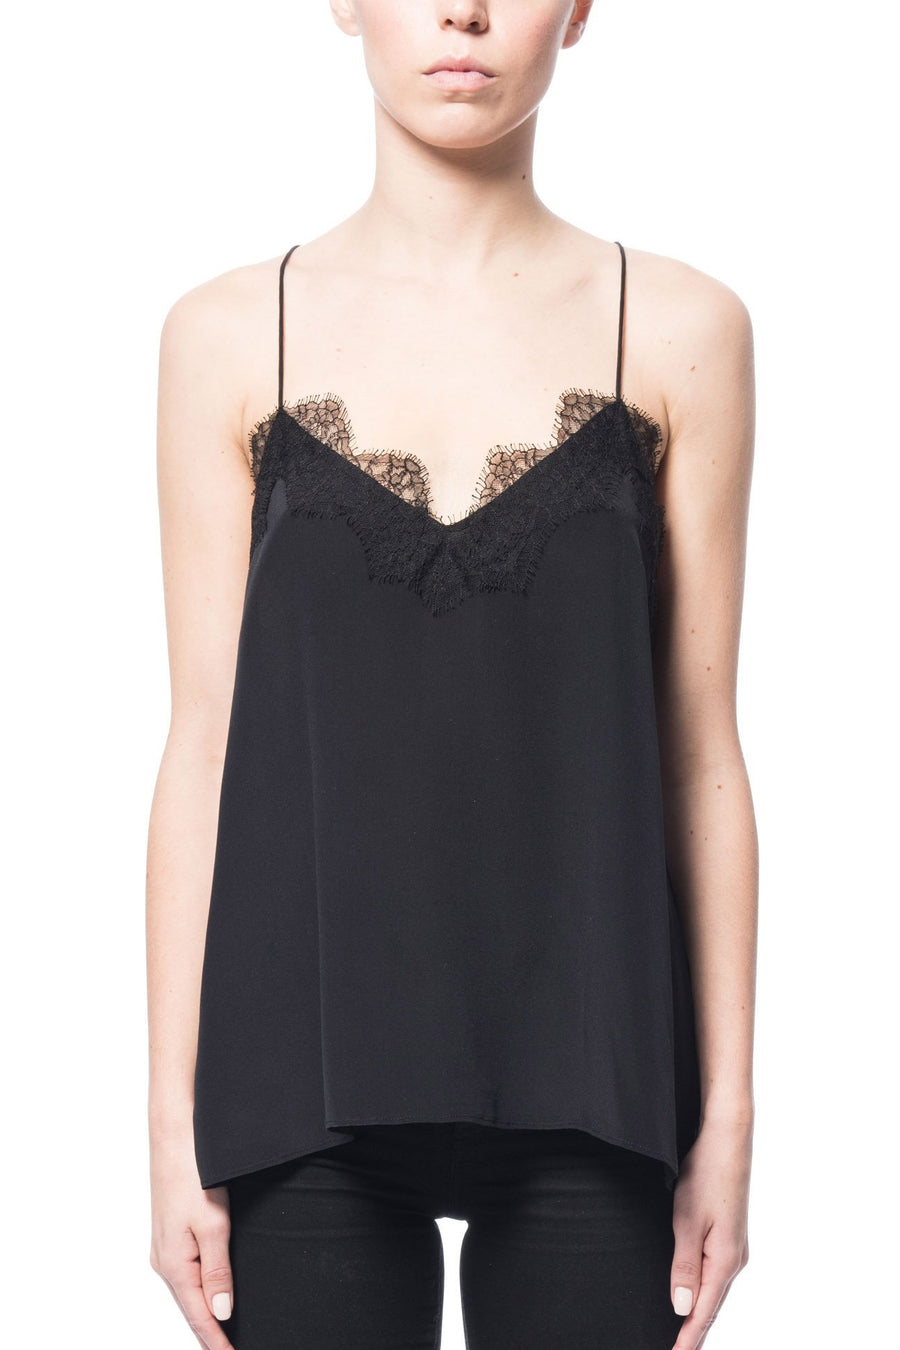 CAMI NYC Romy Lace-Trimmed Camisole Bodysuit